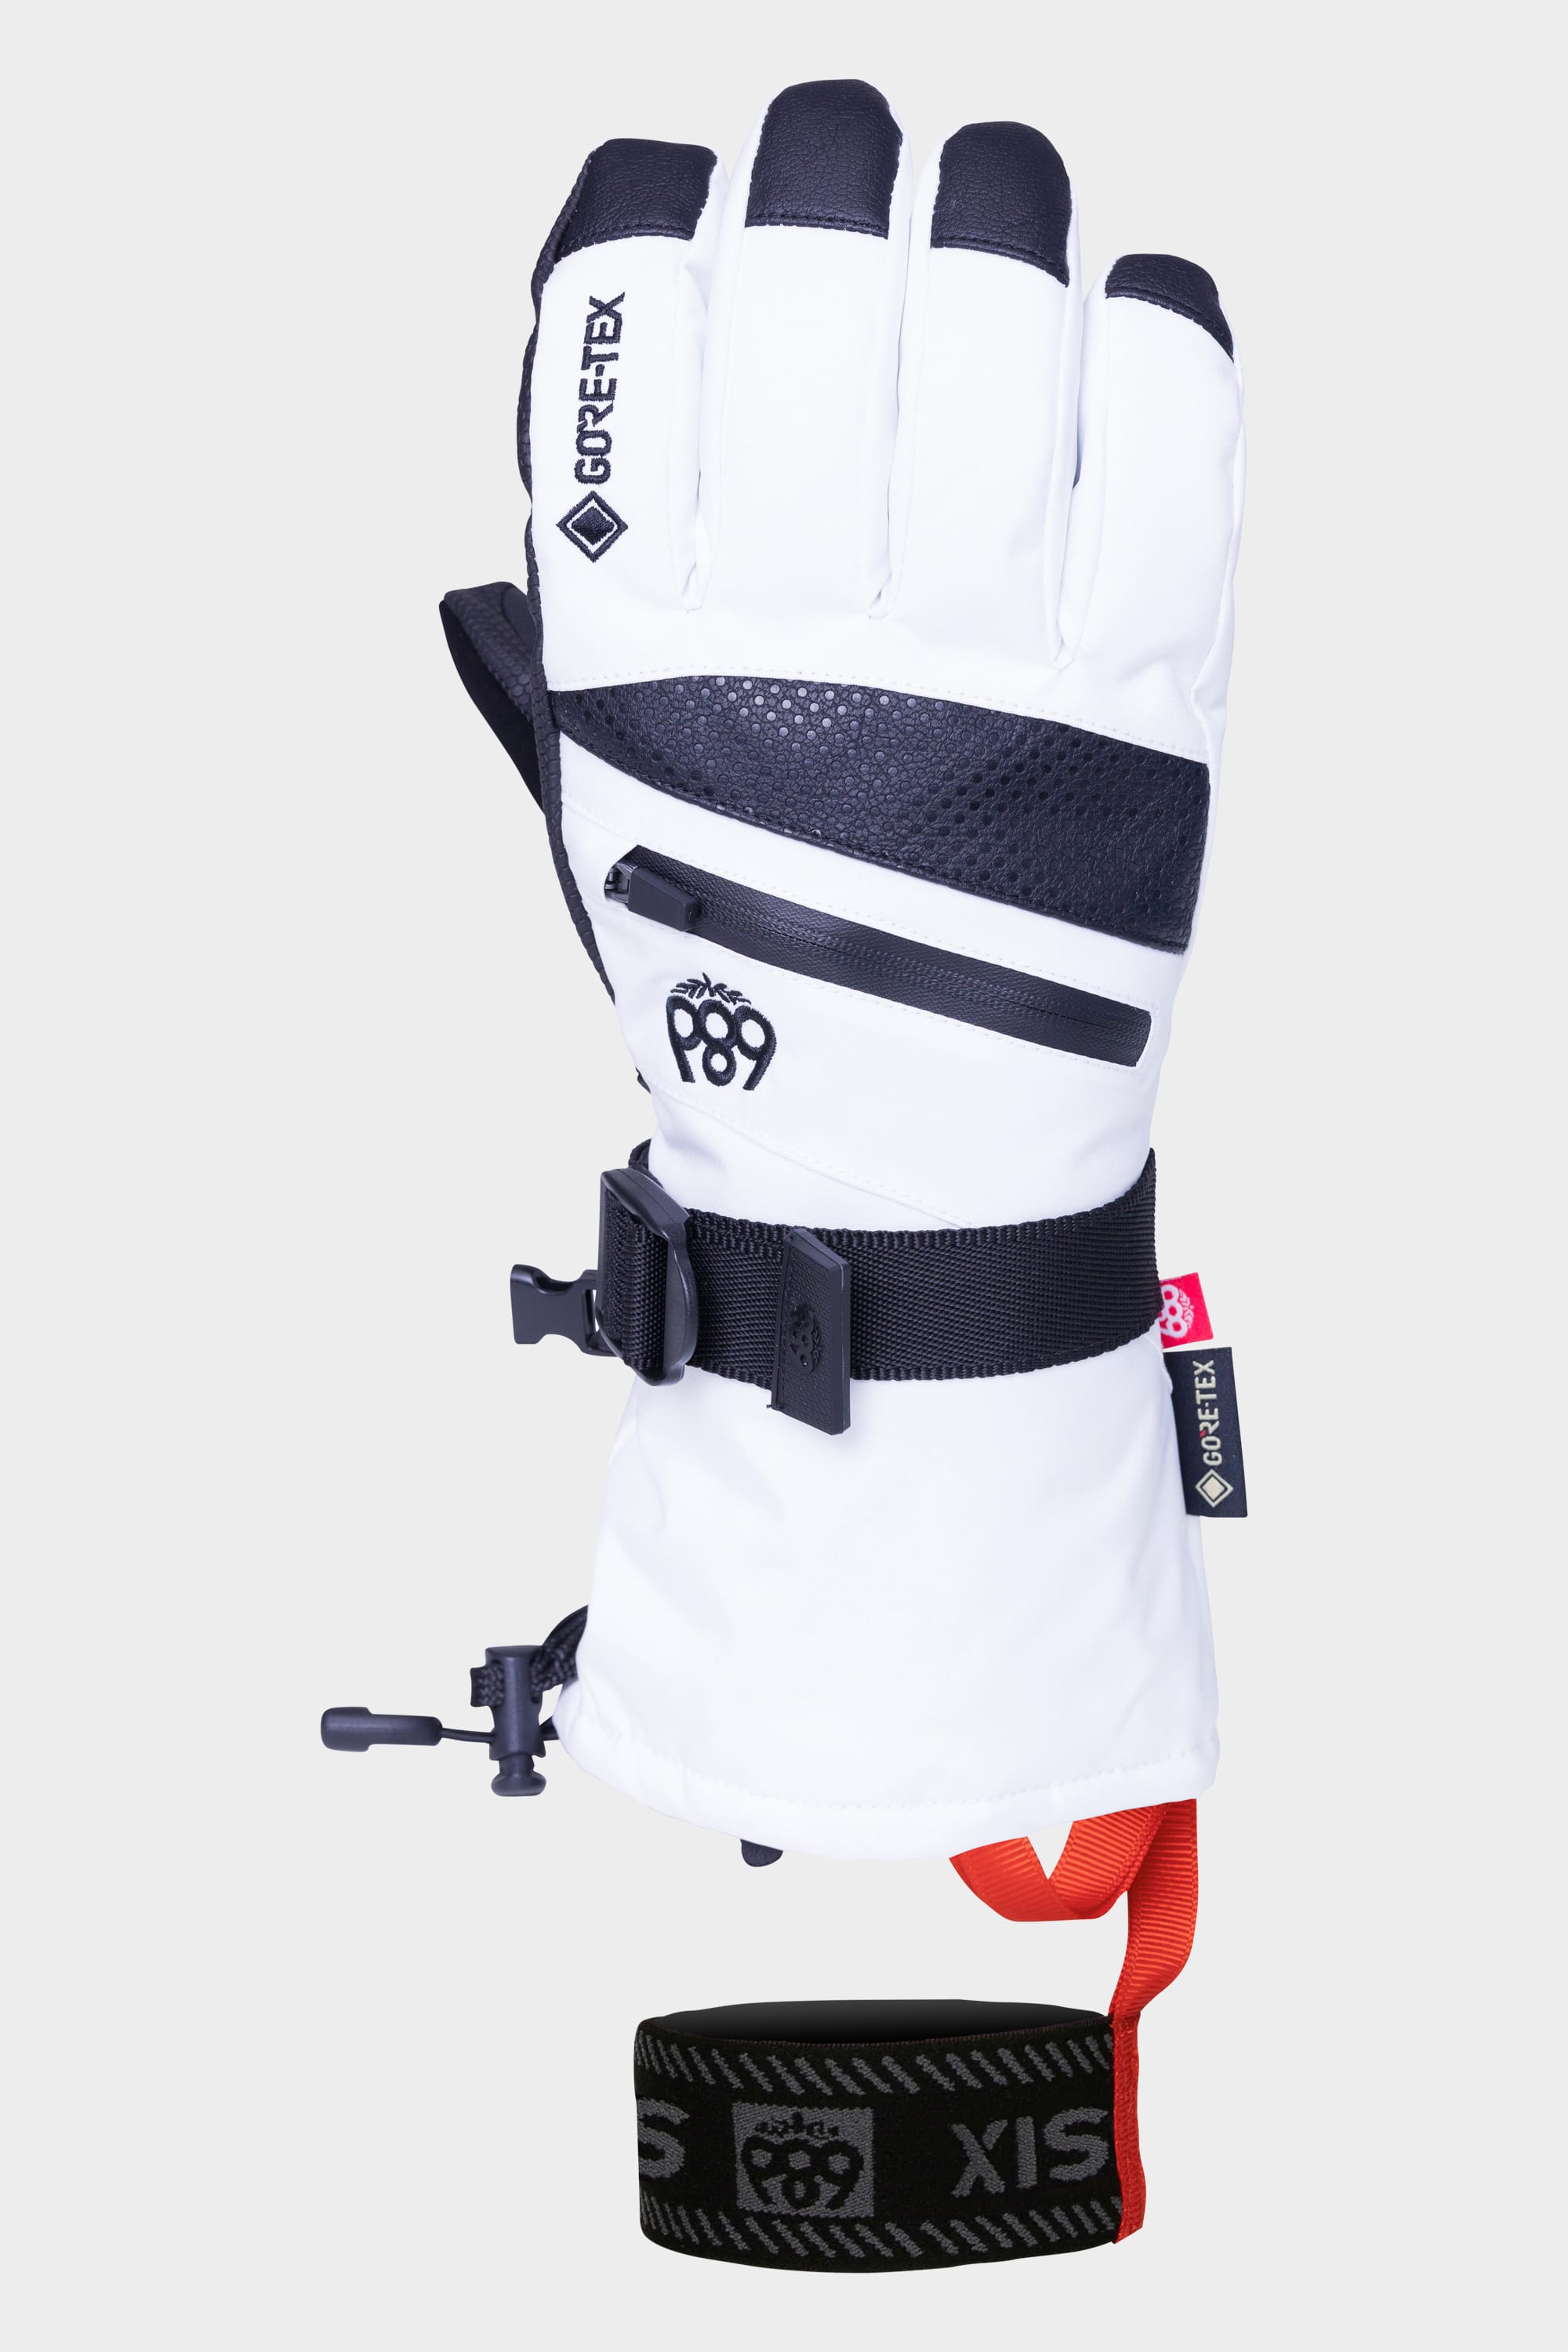 686 Technical Apparel | Women's Snow Gloves & Mitts – 686.com